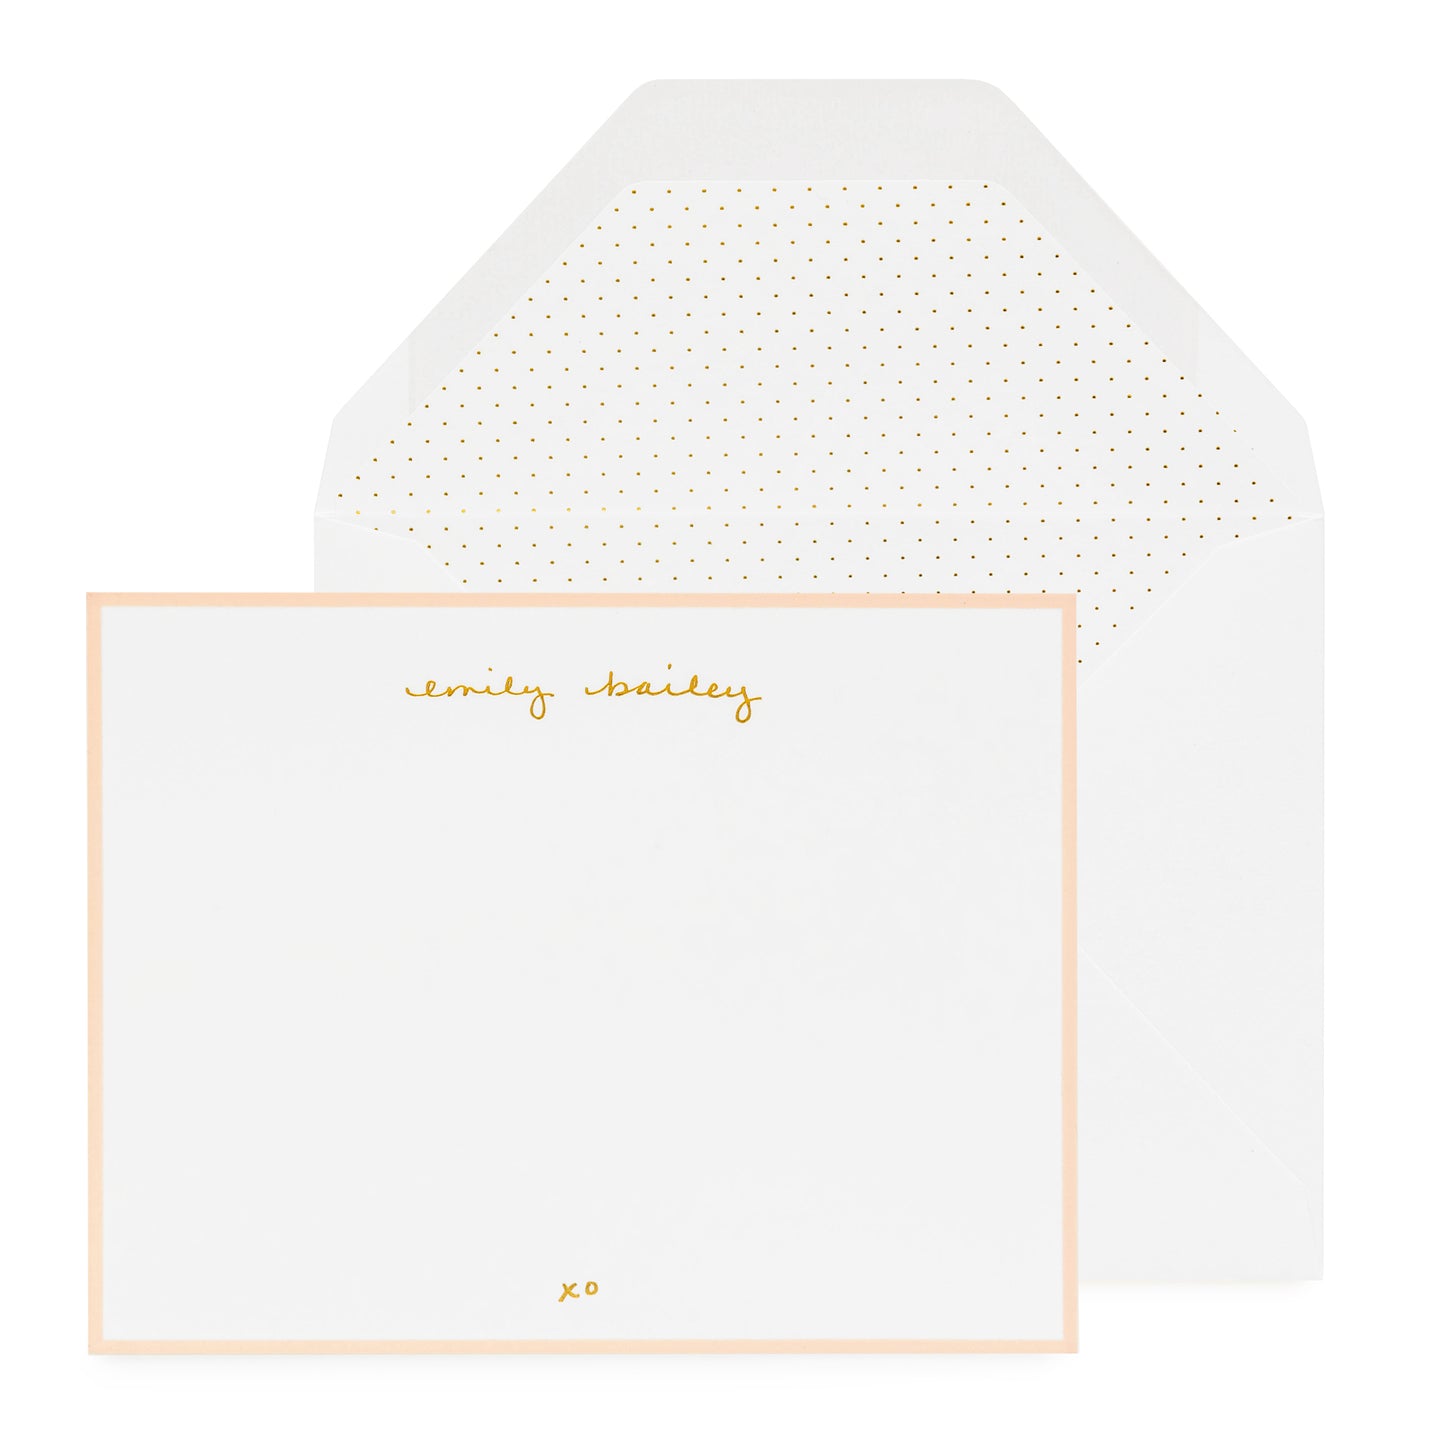 Personalized stationery with gold foil name and pink border